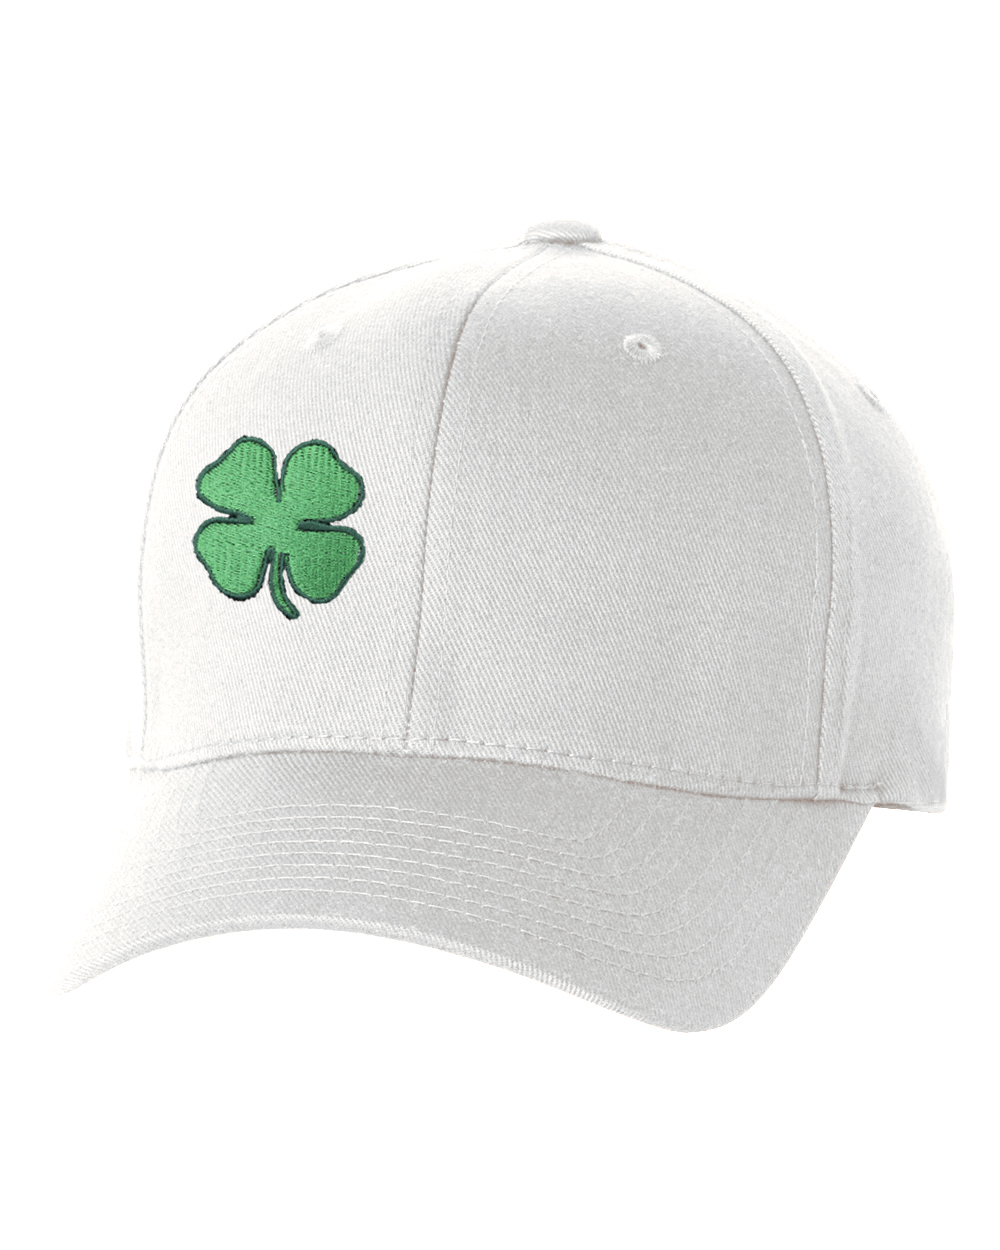 St Patrick's Day Fitted Hat, Four Leaf Clover Flex Fit Baseball Hat - Full Clover - image 1 of 3